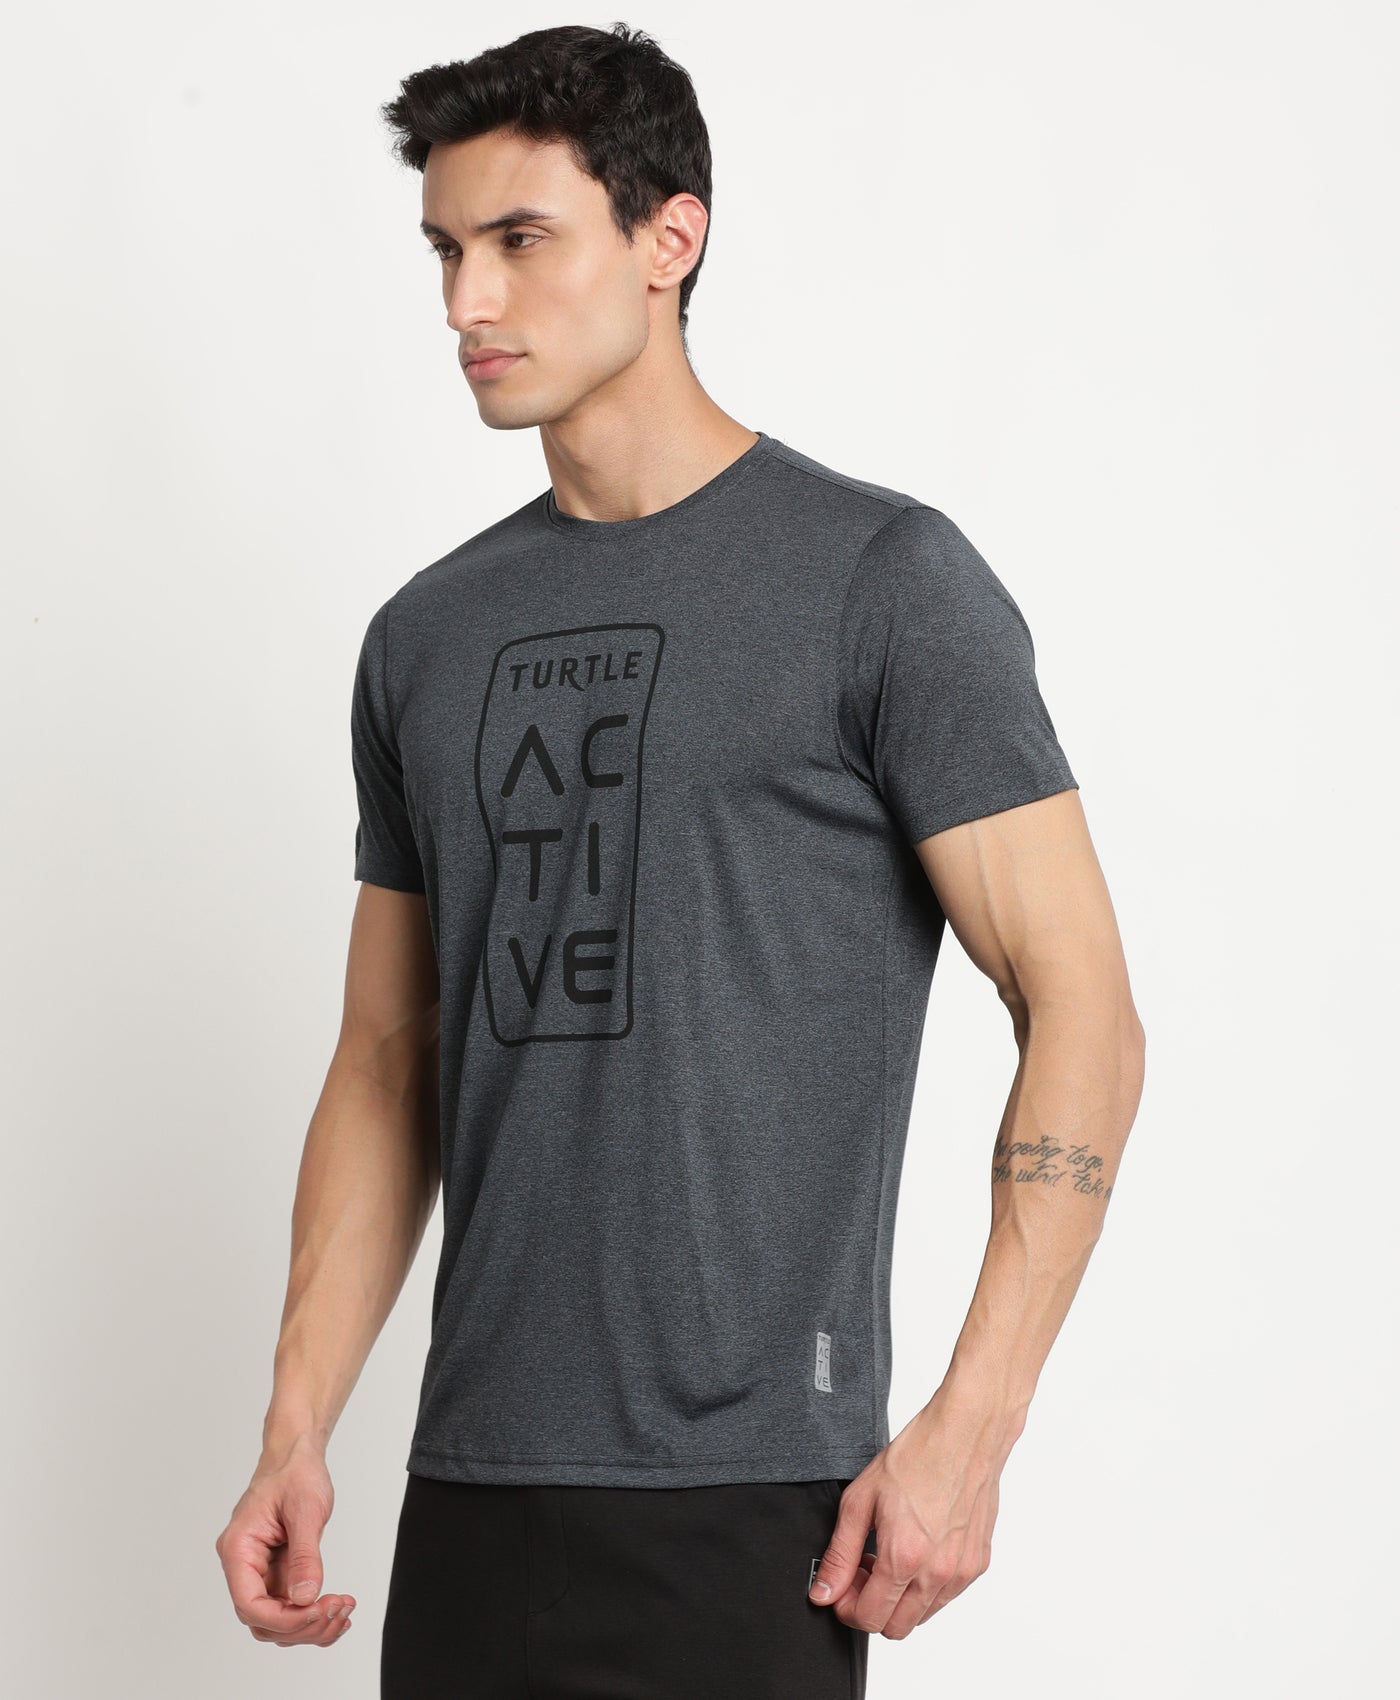 Polyester Charcoal Grey Printed Crew Neck Half Sleeve Active T-Shirt